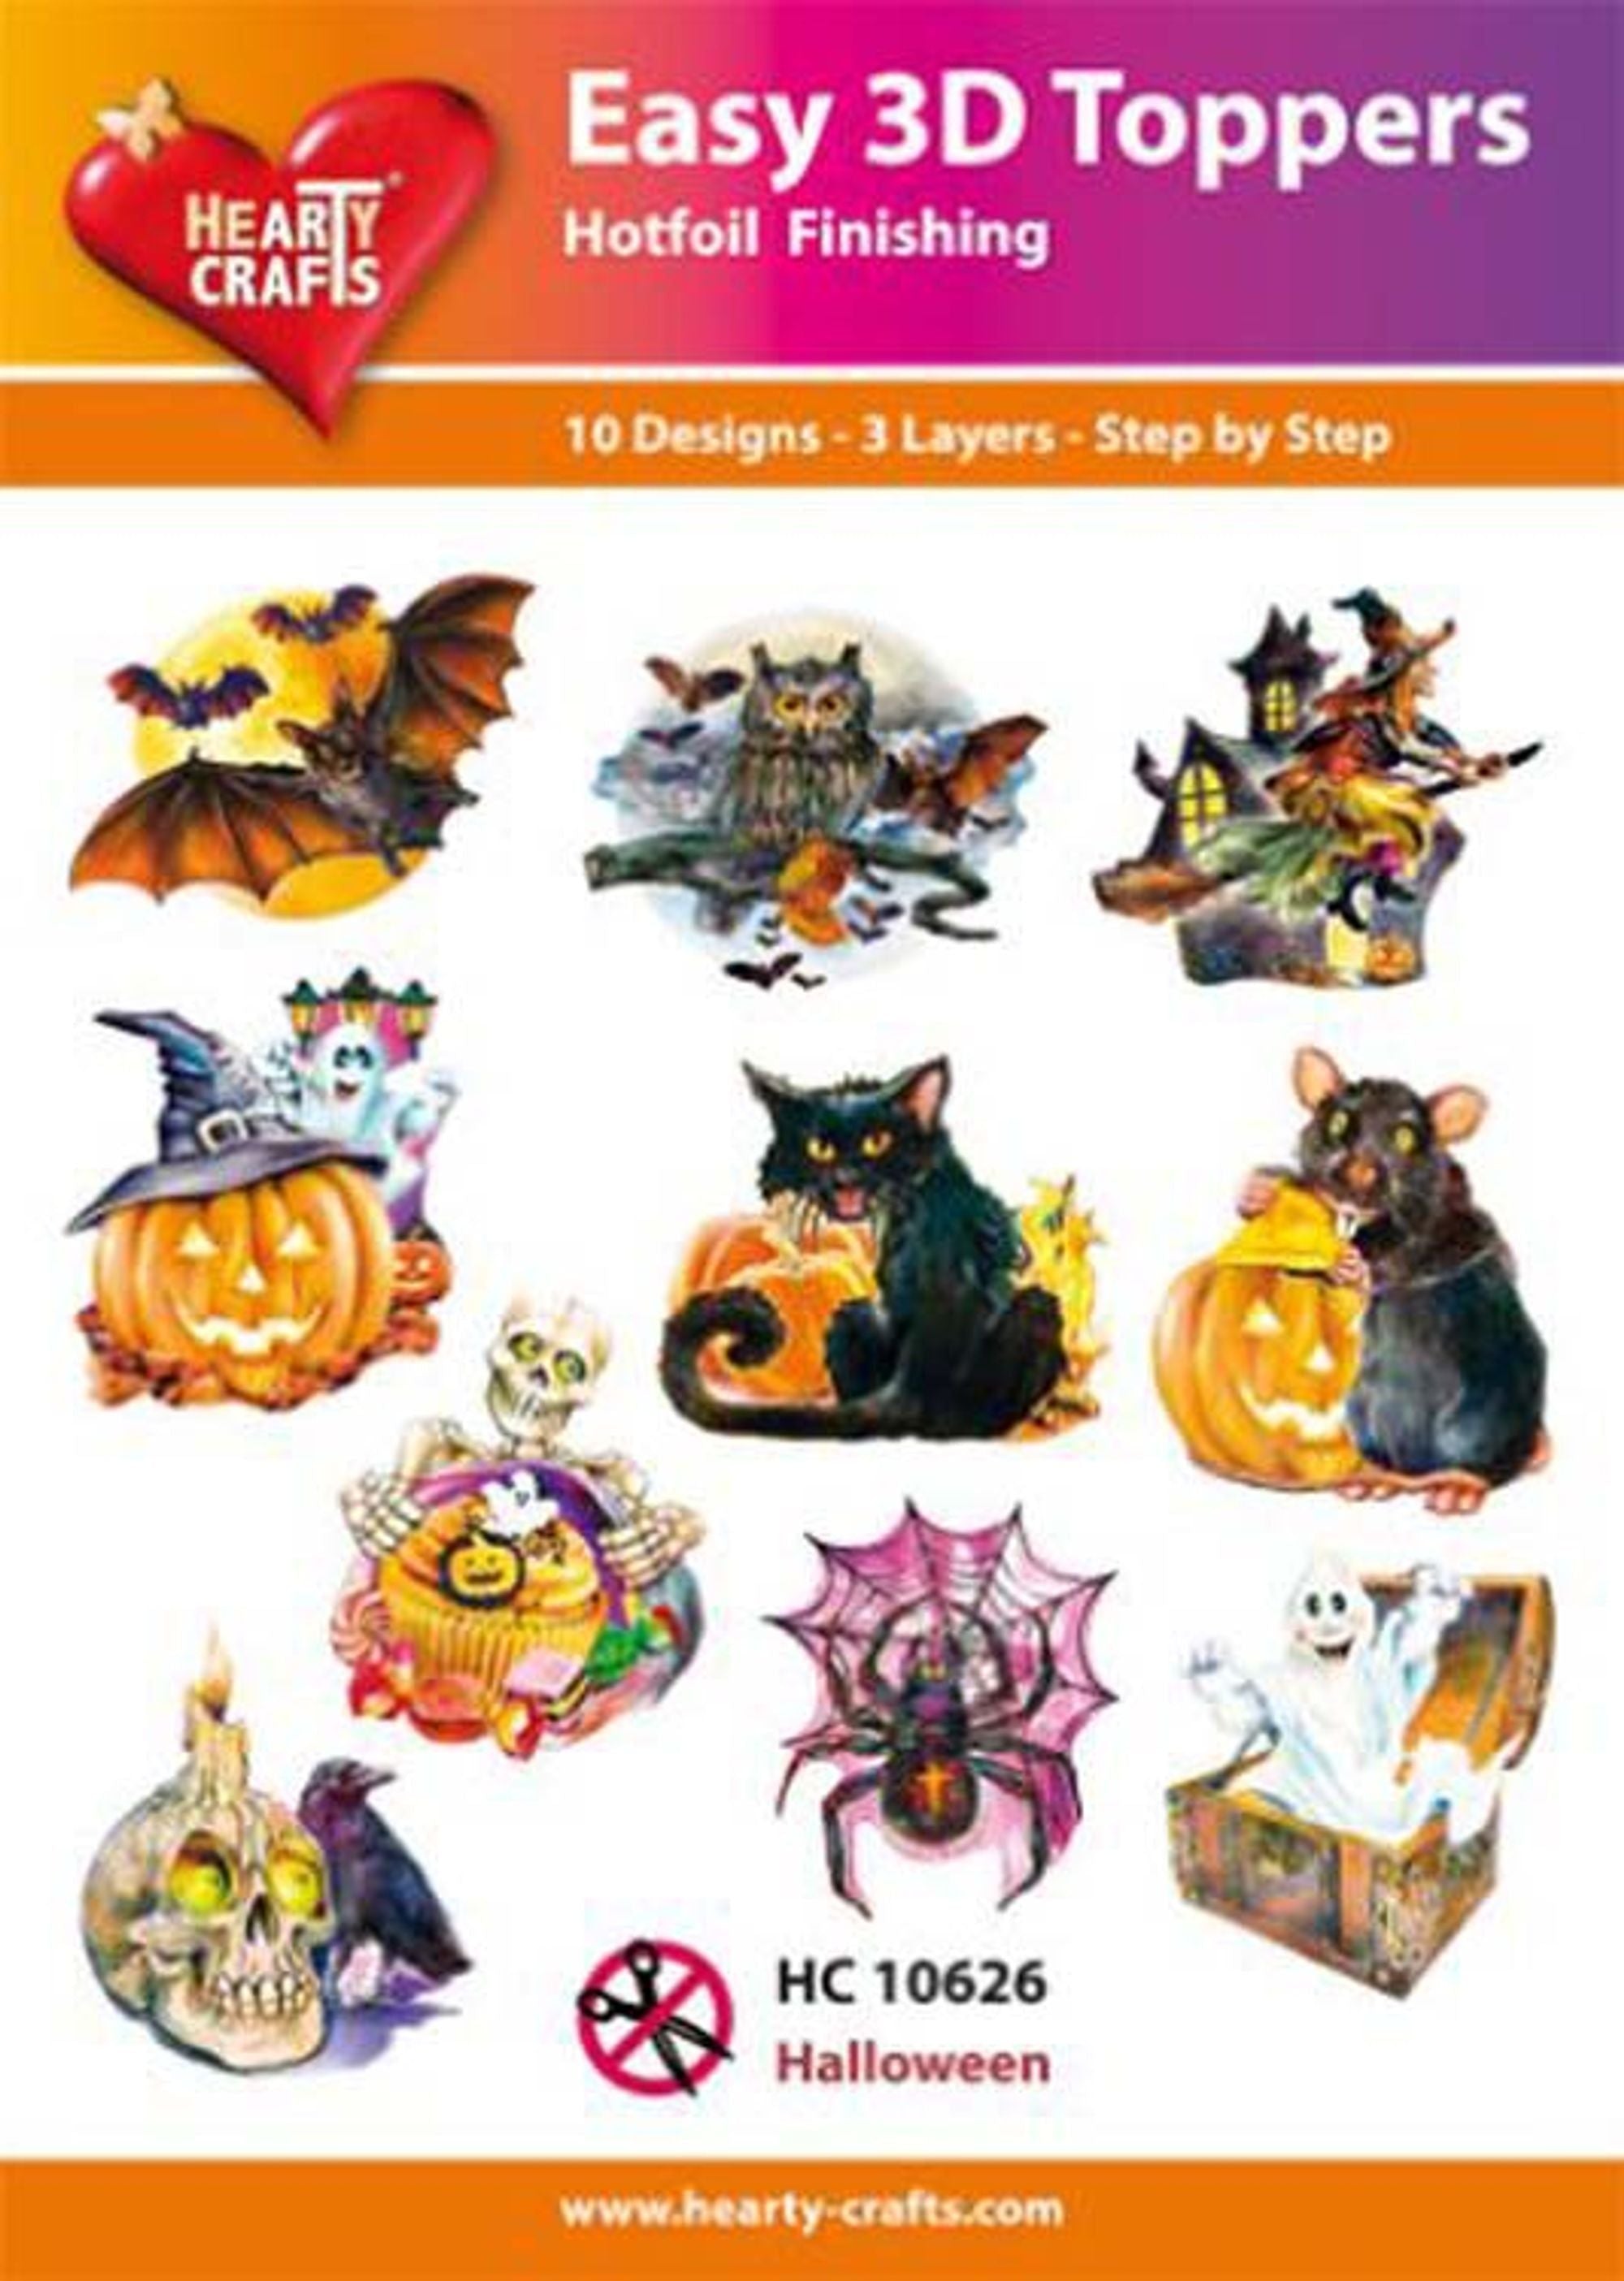 Hearty Crafts Easy 3D Toppers - Halloween